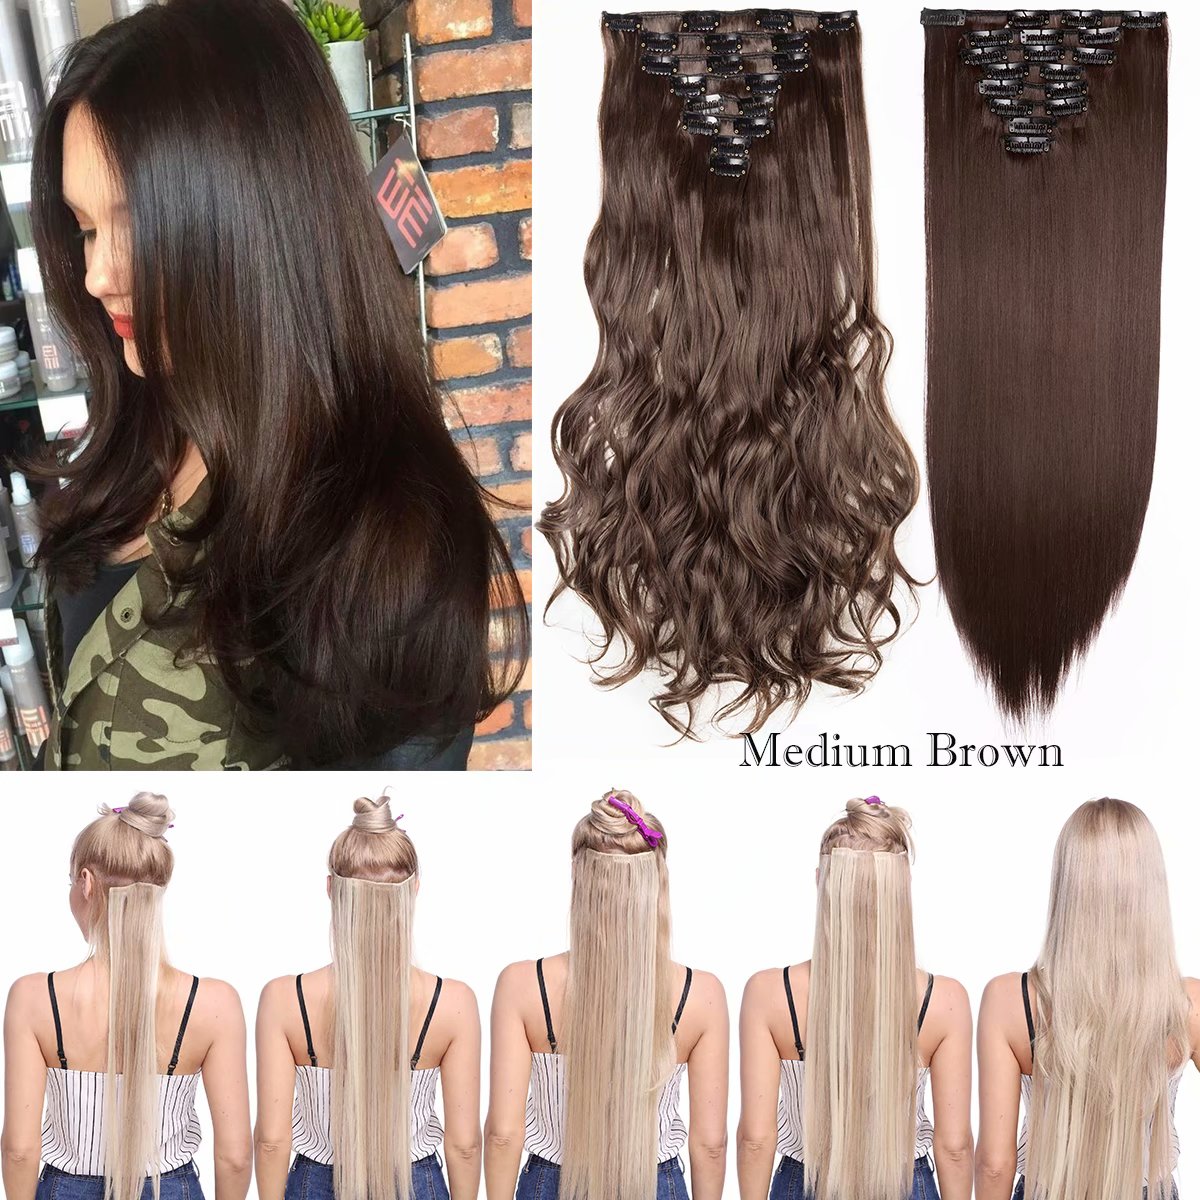 Benehair Clip in Hair Extensions Full Head Long Thick 8 Pieces Hair 18 Clips Curly Wavy Straight Hairpieces 100% Real Natural as Human Best Hair Set 17'' Curly Medium Brown - image 3 of 11